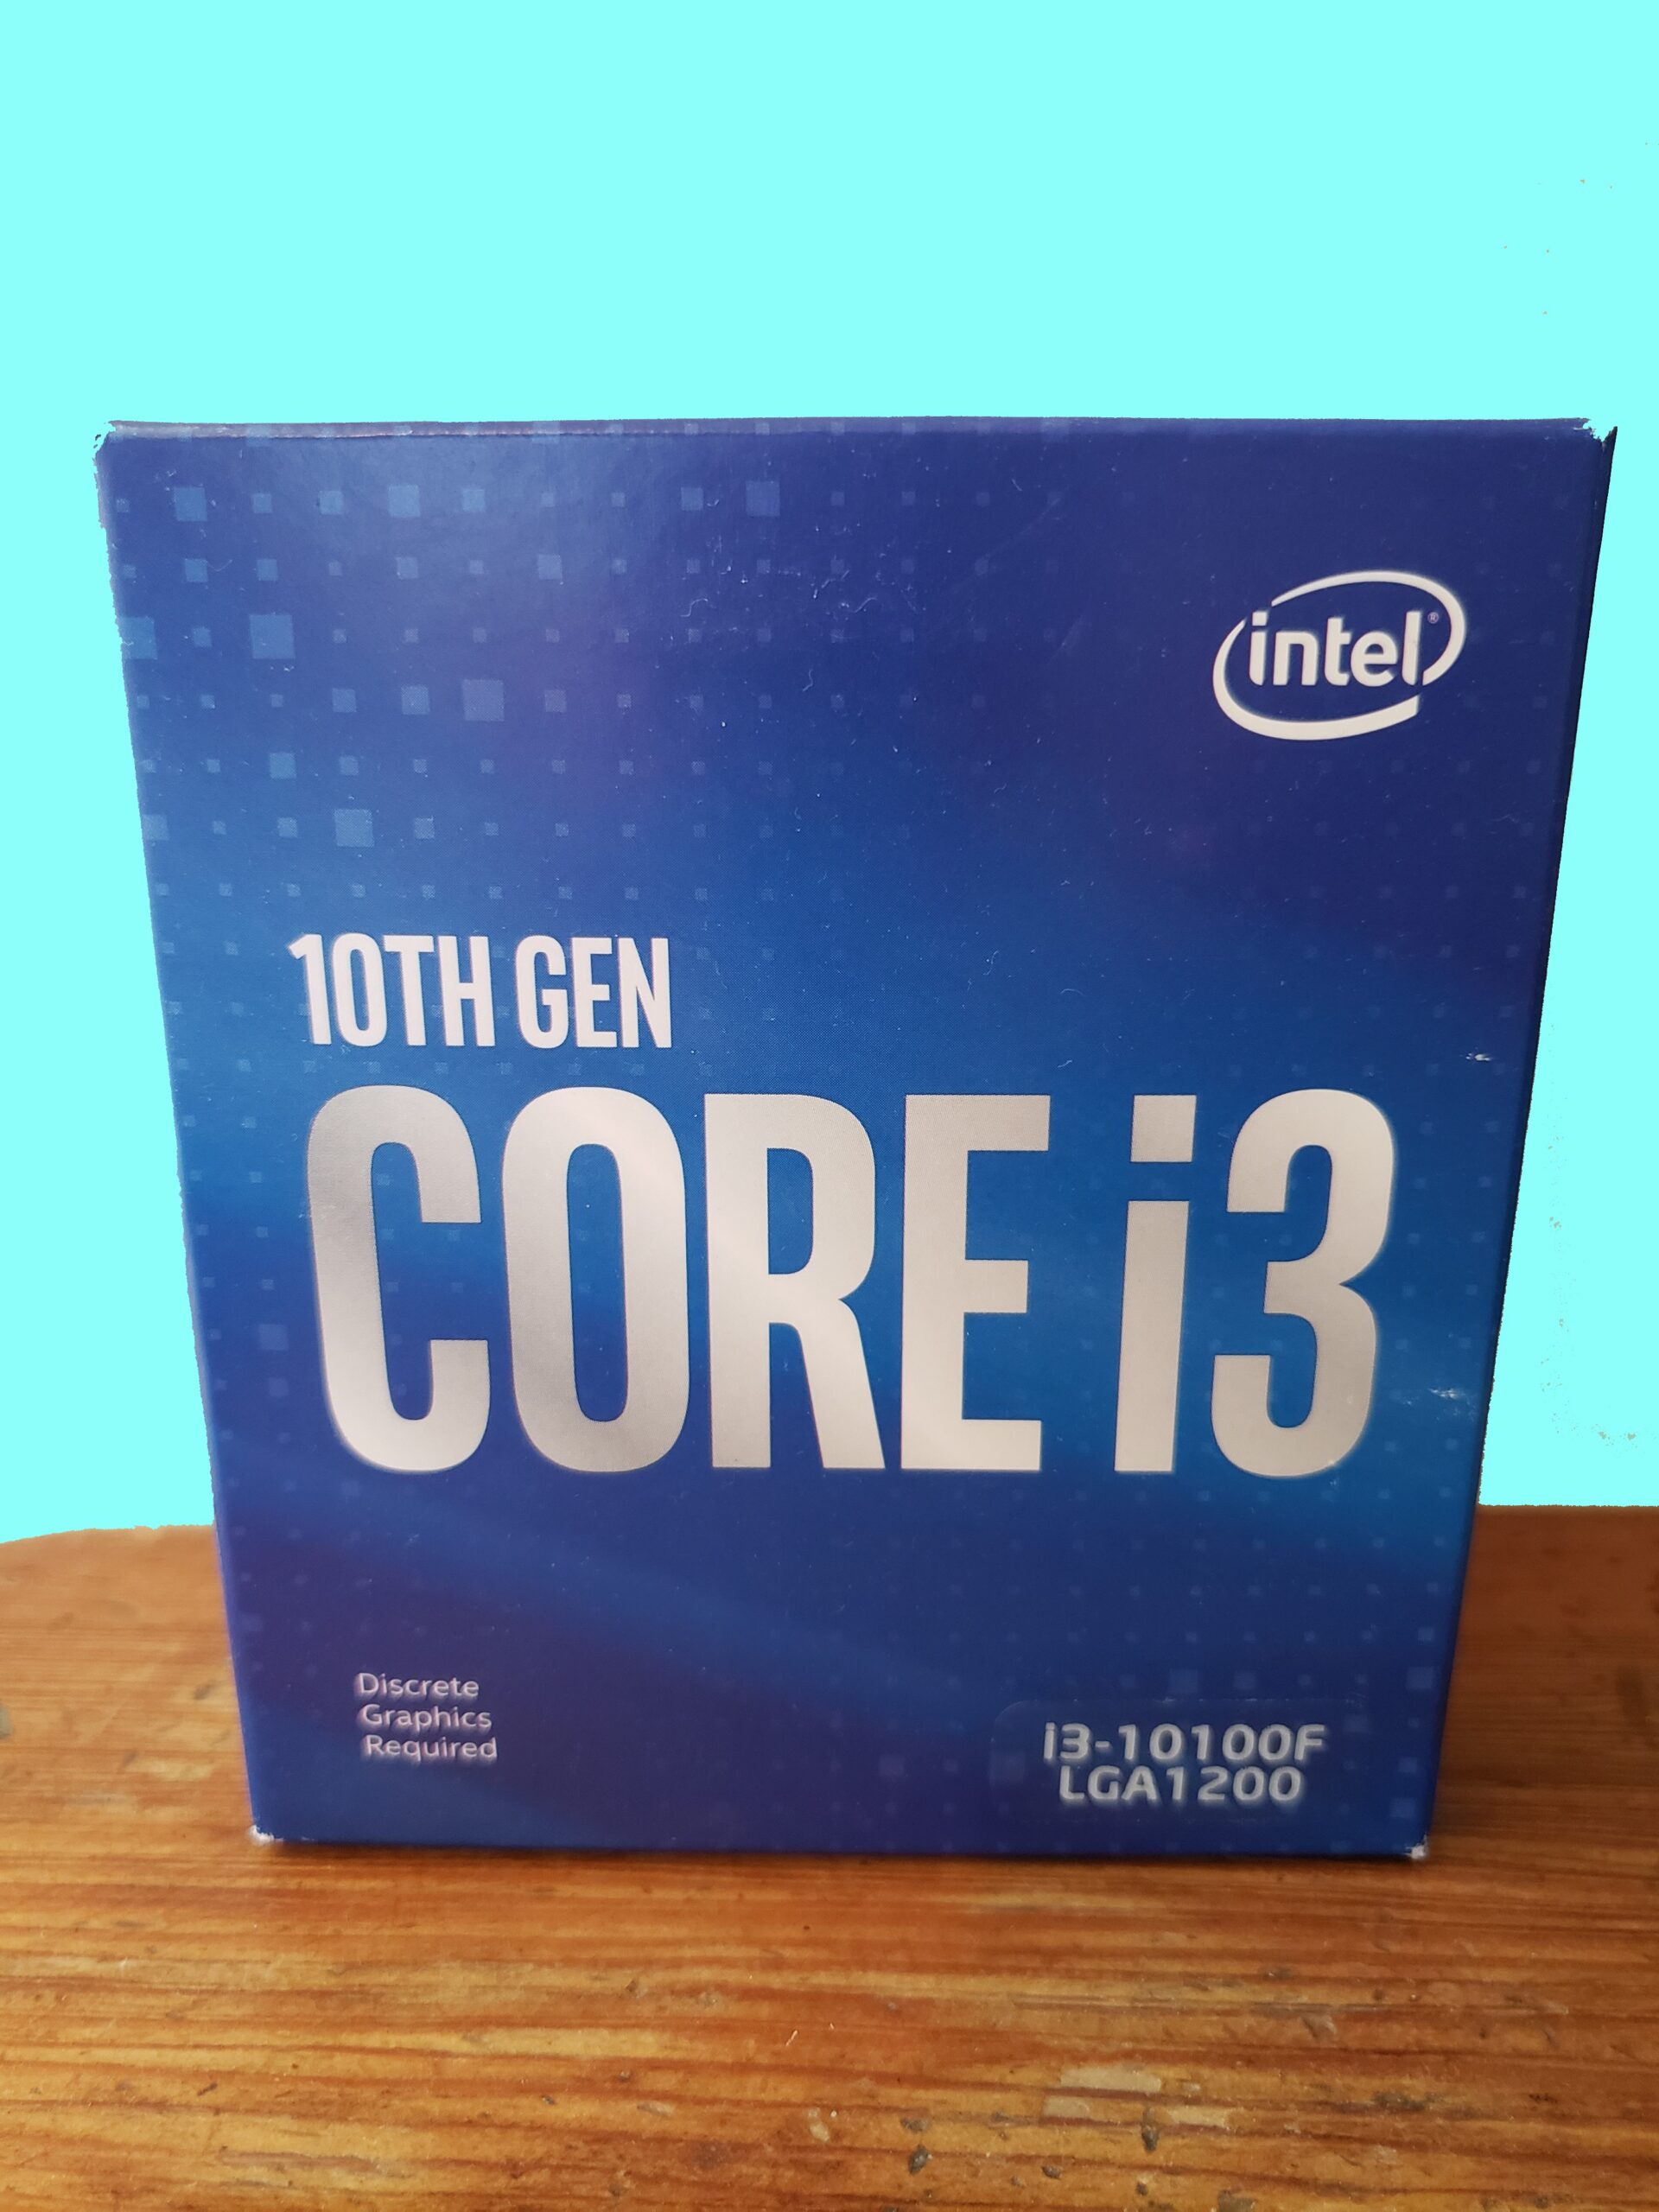 Are Core i3 CPUs Good Enough for Gaming?